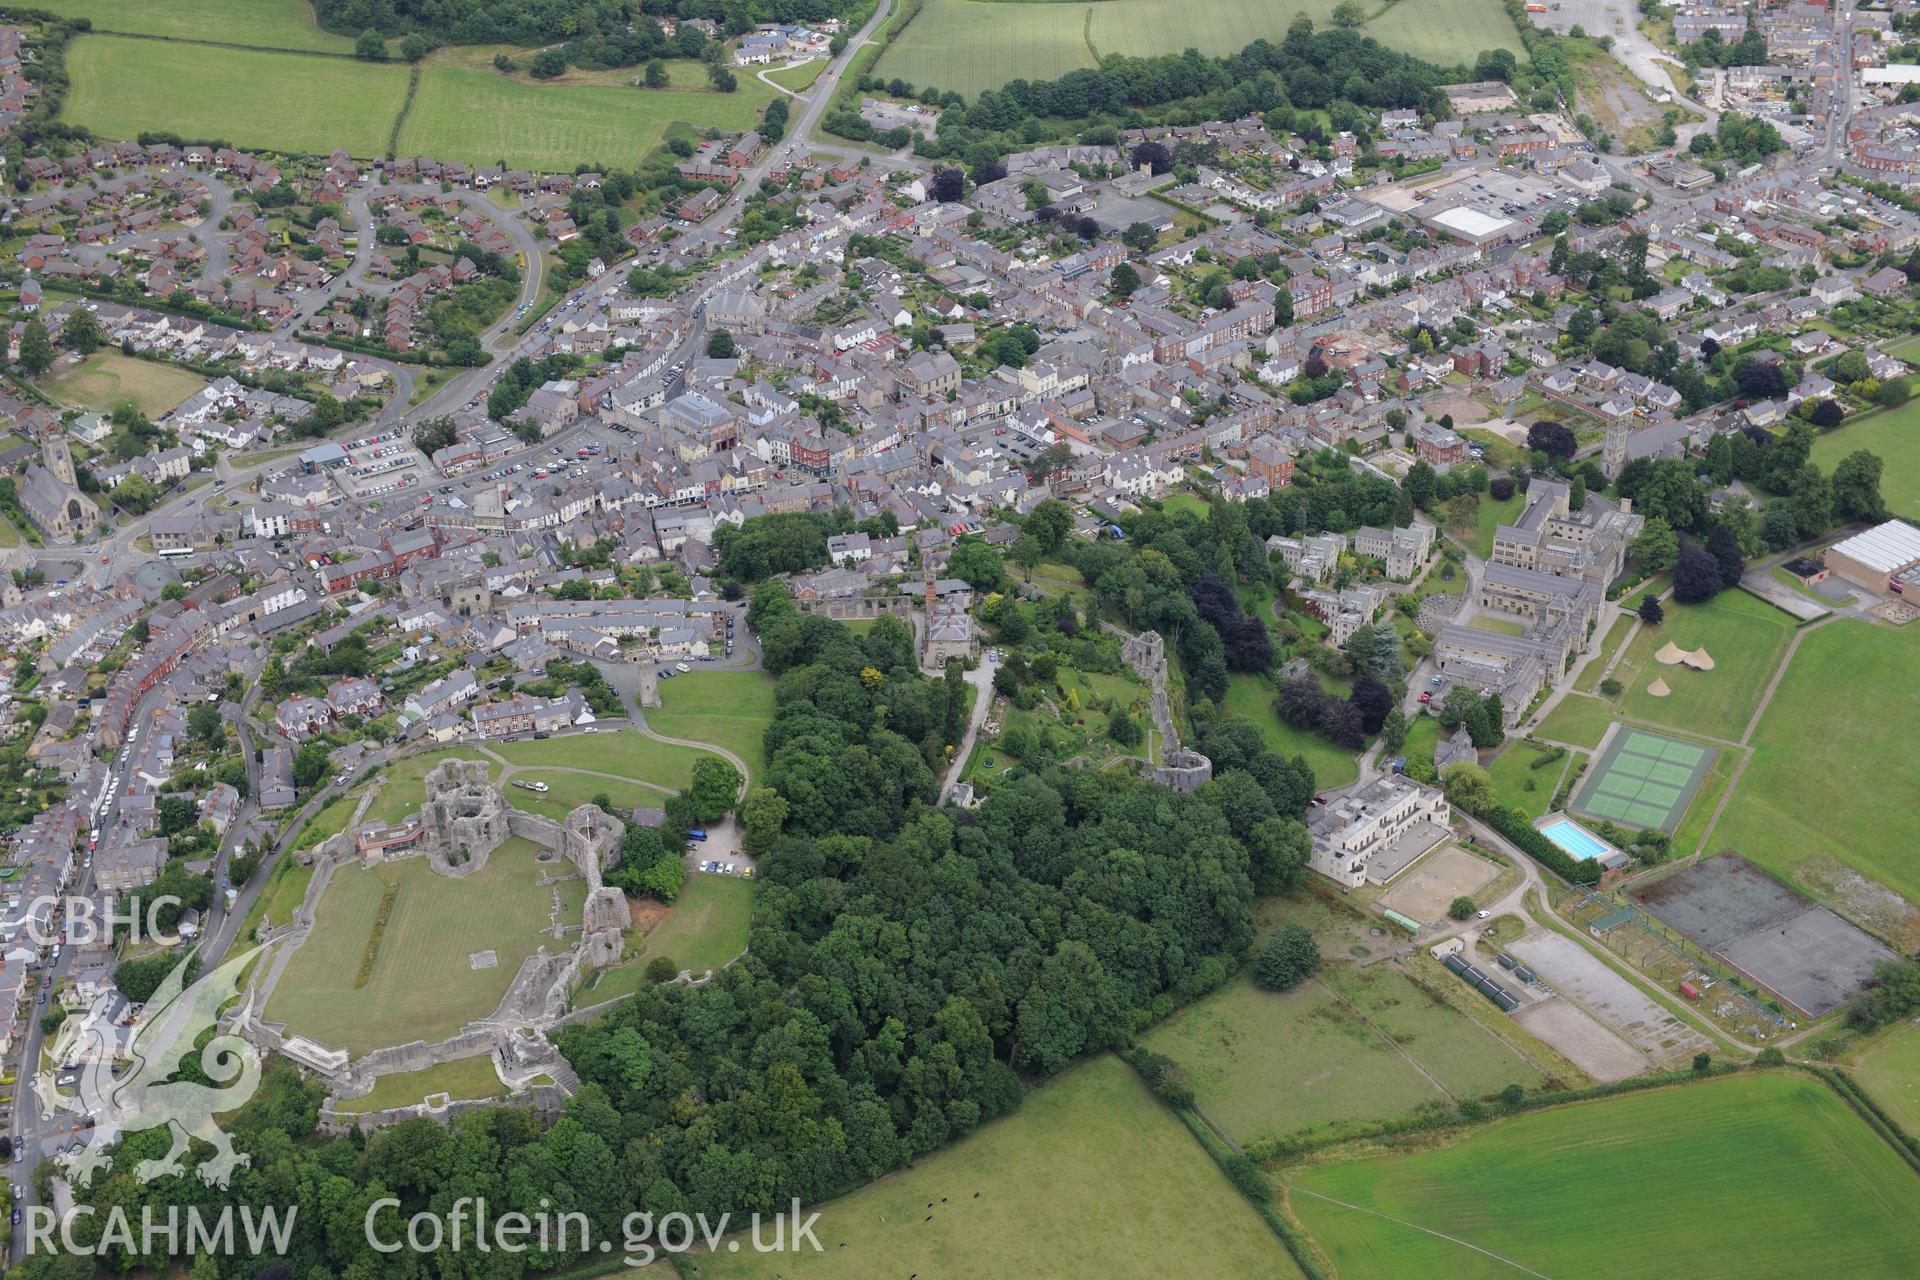 Denbigh Castle, Castle House, town walls, Goblin Tower, St. Mary's Church, Howell's School and Coed Cwningaer. Oblique aerial photograph taken during the Royal Commission's programme of archaeological aerial reconnaissance by Toby Driver on 30th July 2015.